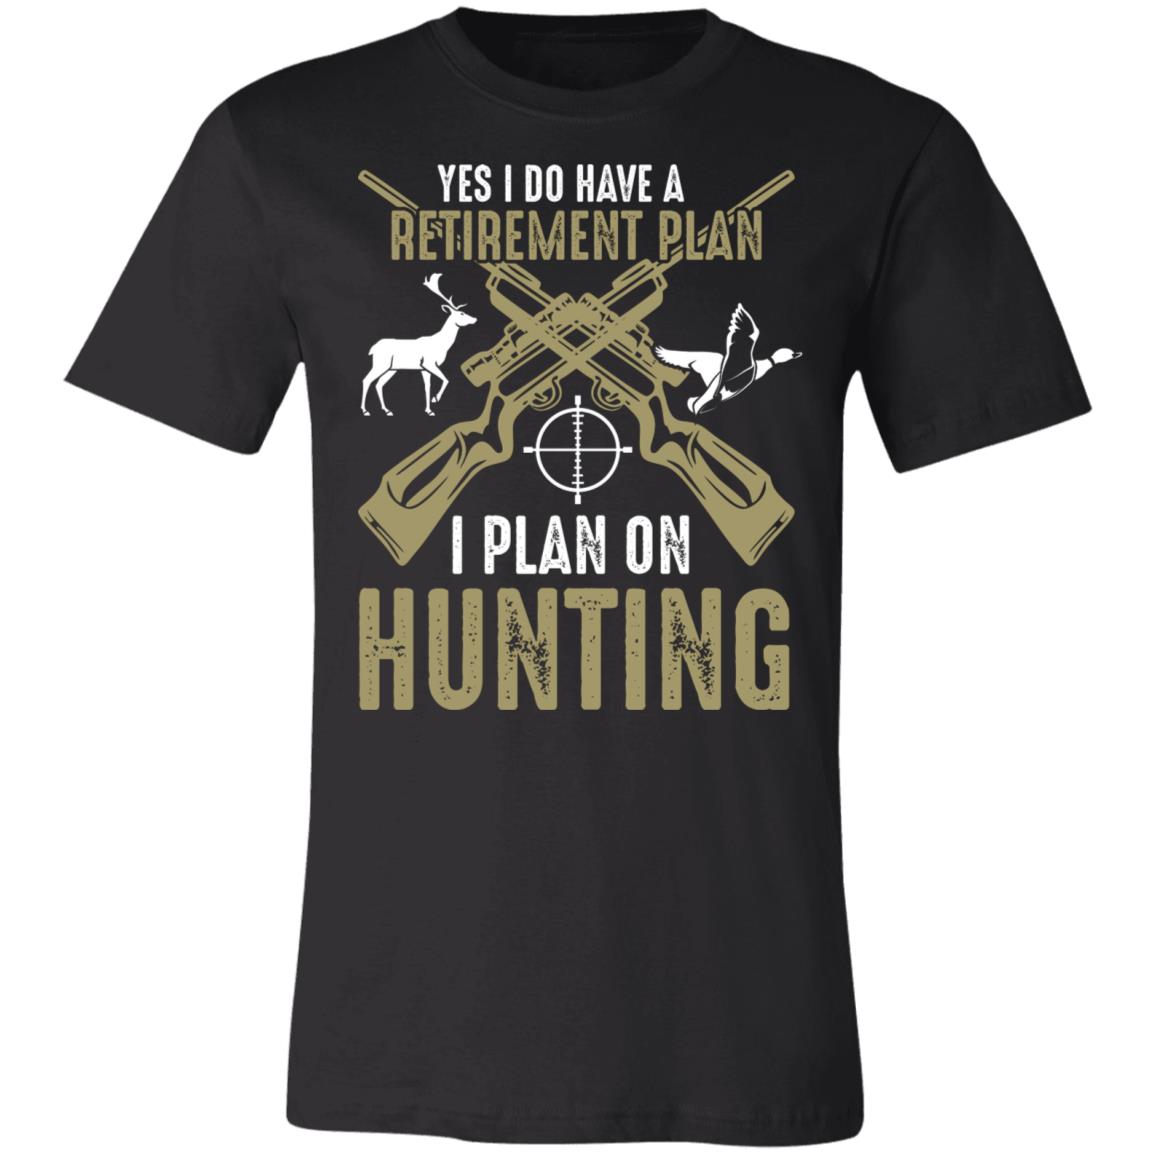 Retirement Plan is Hunting Hunter Gift T-Shirt-Express Your Love Gifts